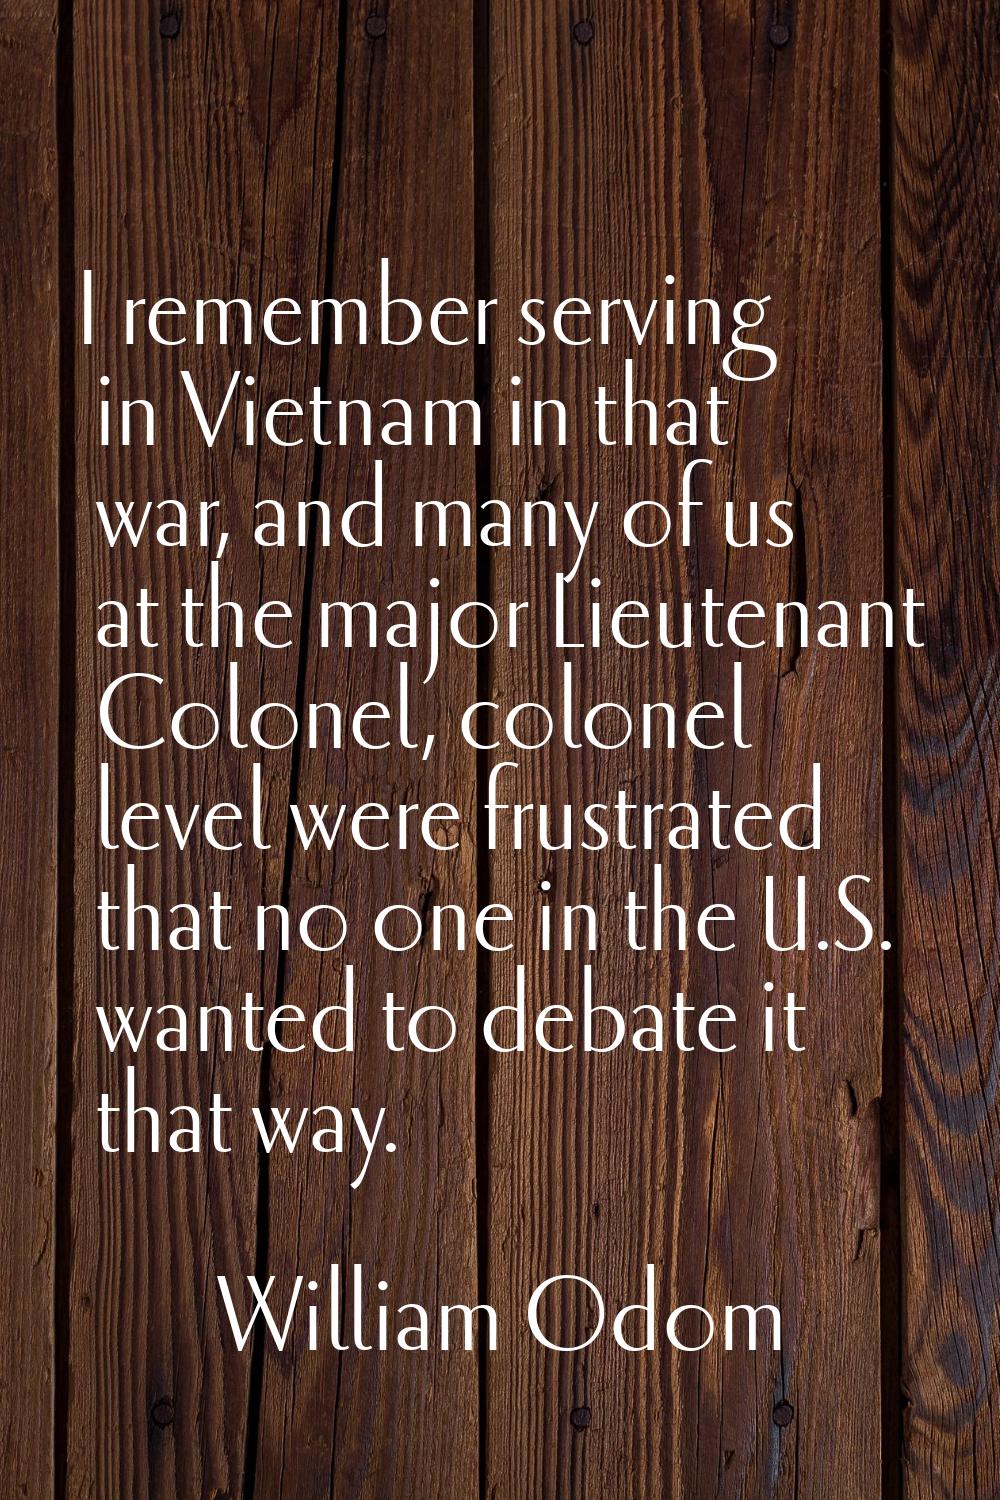 I remember serving in Vietnam in that war, and many of us at the major Lieutenant Colonel, colonel 